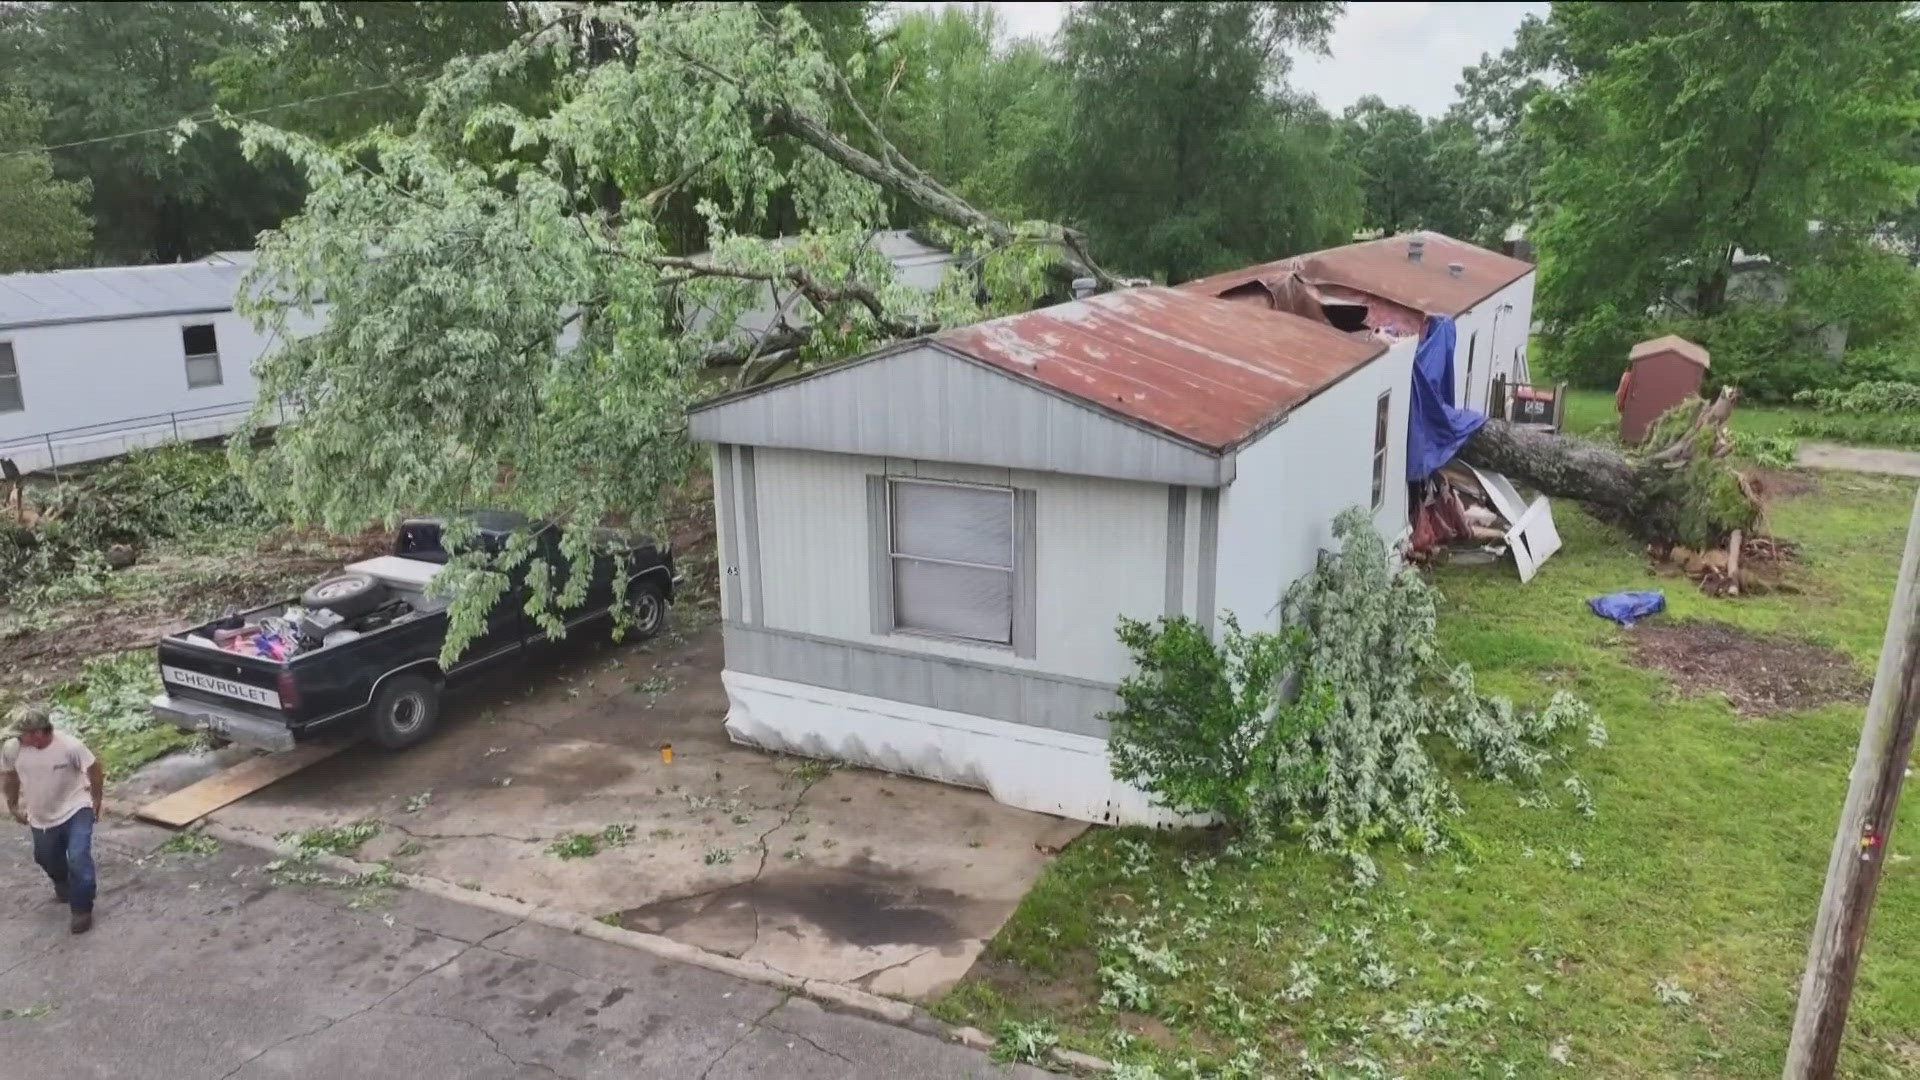 RESIDENTS OF THE MAGNOLIA RIDGE COMMUNITY IN VAN BUREN TELL 5NEWS THIS STORM WAS ONE OF THE WORST THEY'VE EXPERIENCED...